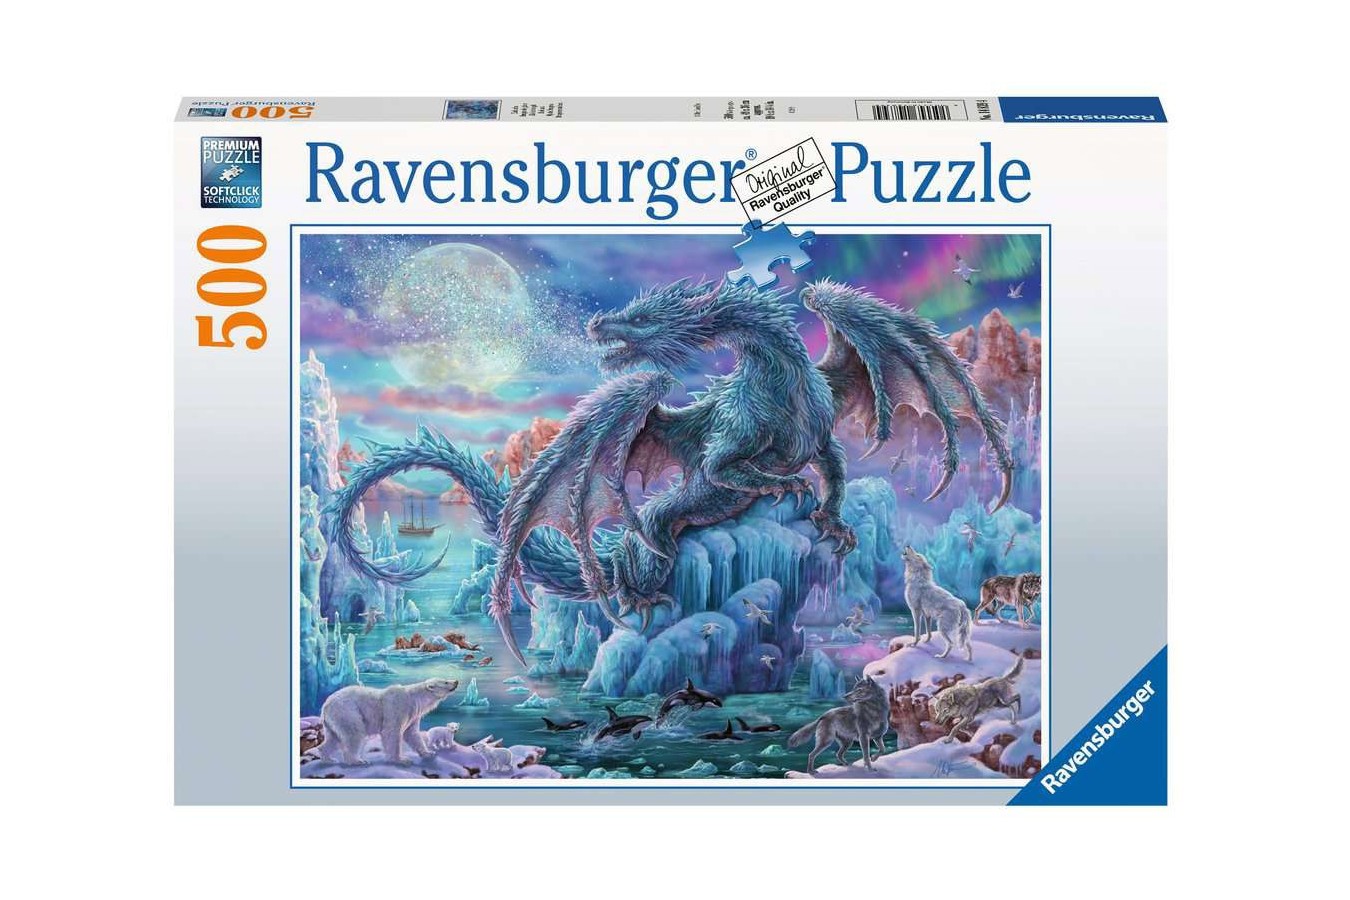 Puzzle Ravensburger - Ice Dragon, 500 piese (14839)